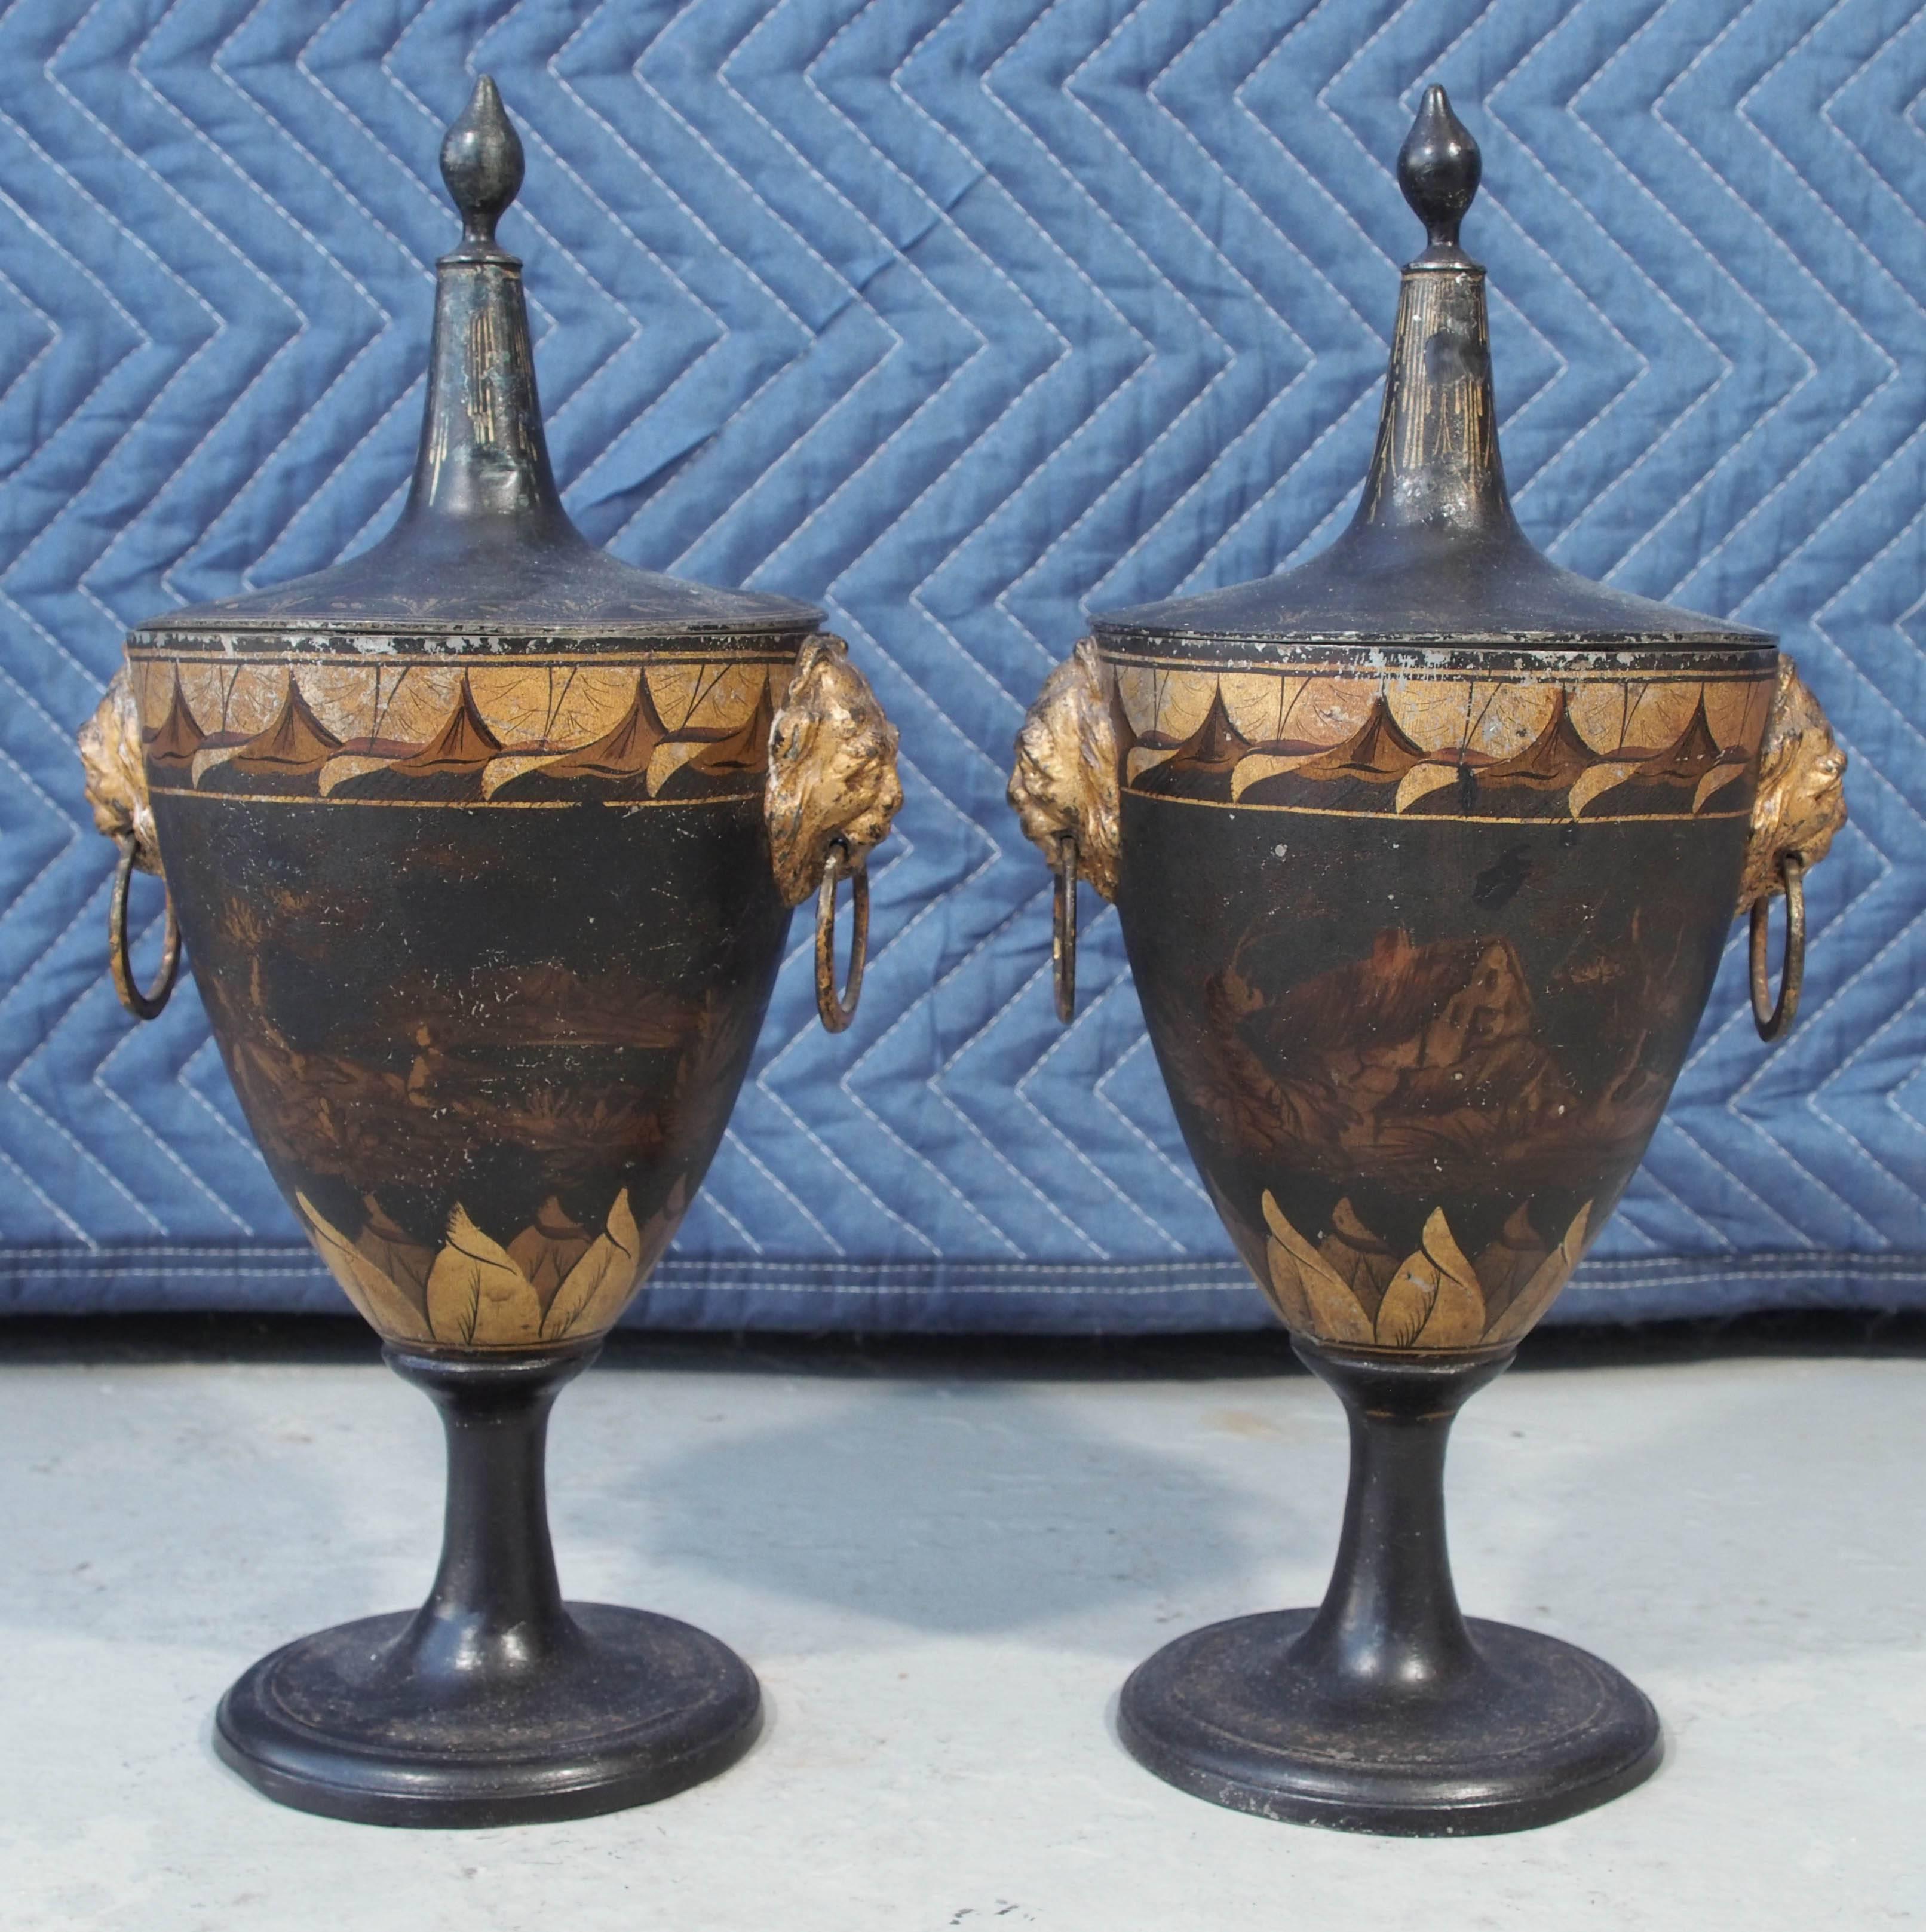 Pair of Tole Painted and Gilt Covered Chestnut Urns For Sale 2